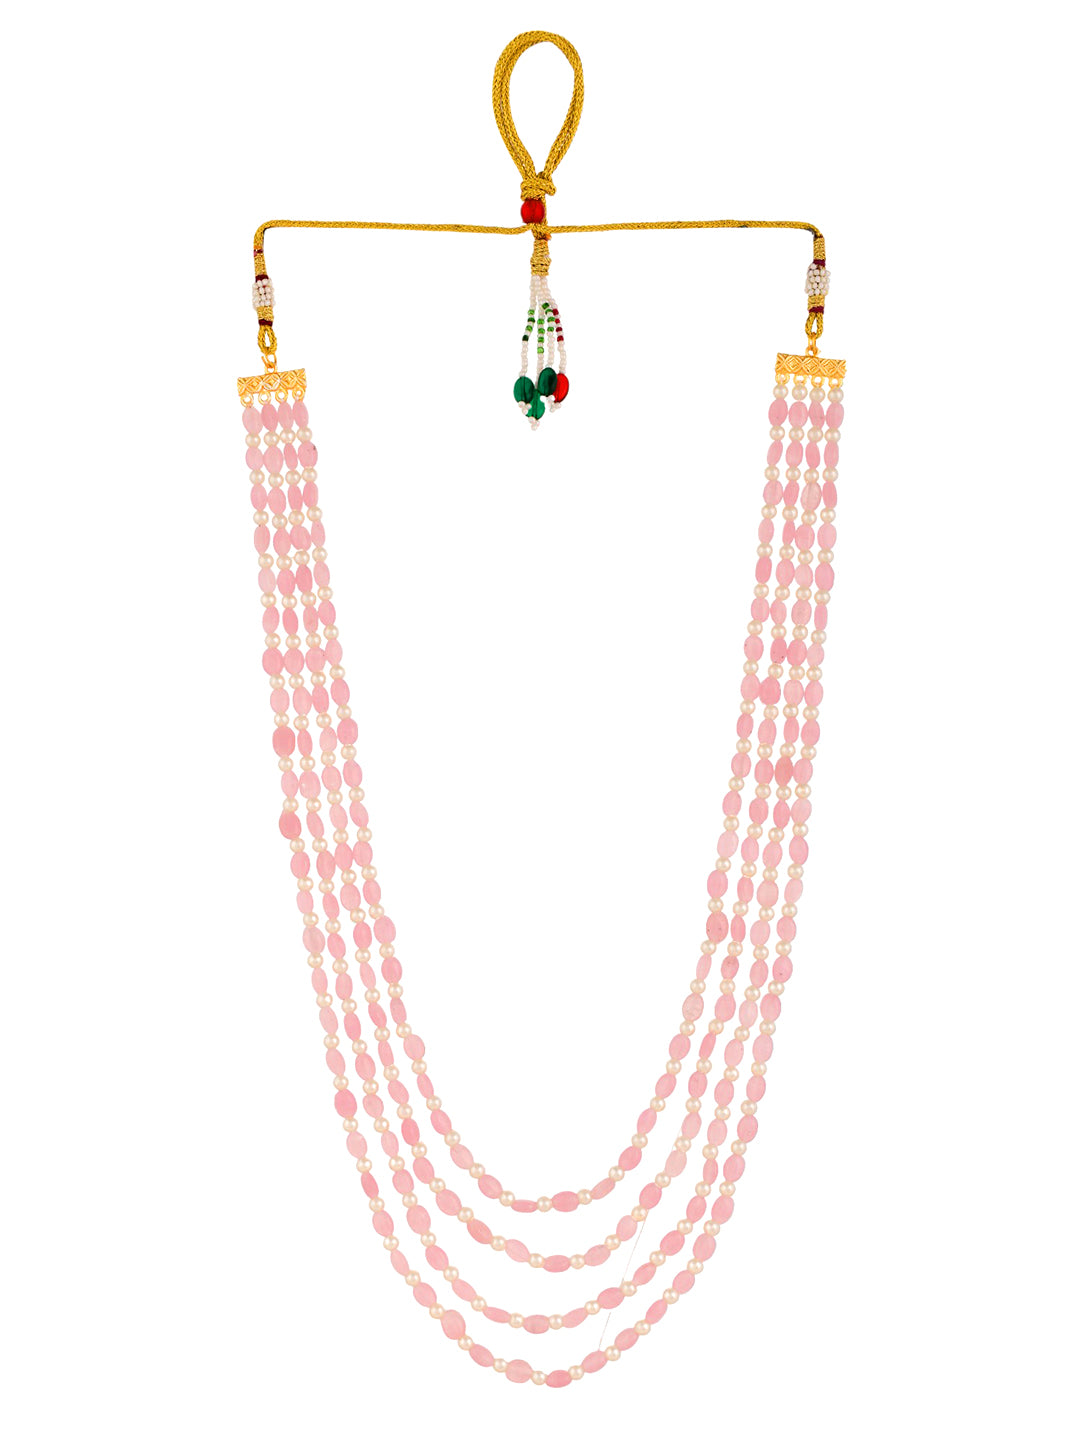 Pear beaded long Layered Necklace for women